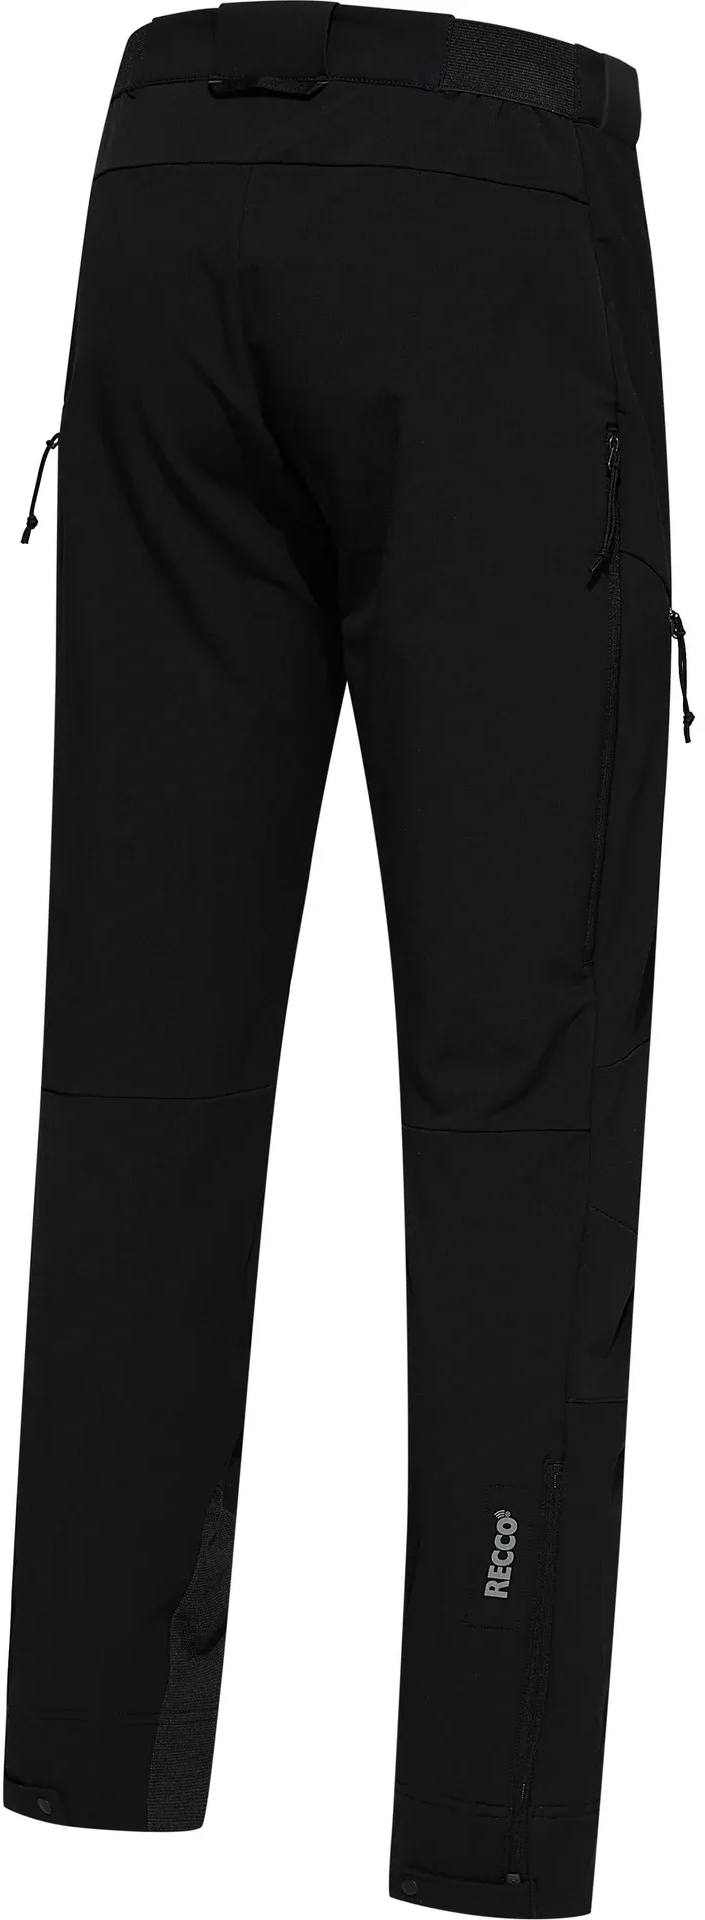 Women’s Discover Touring Pant Black 46